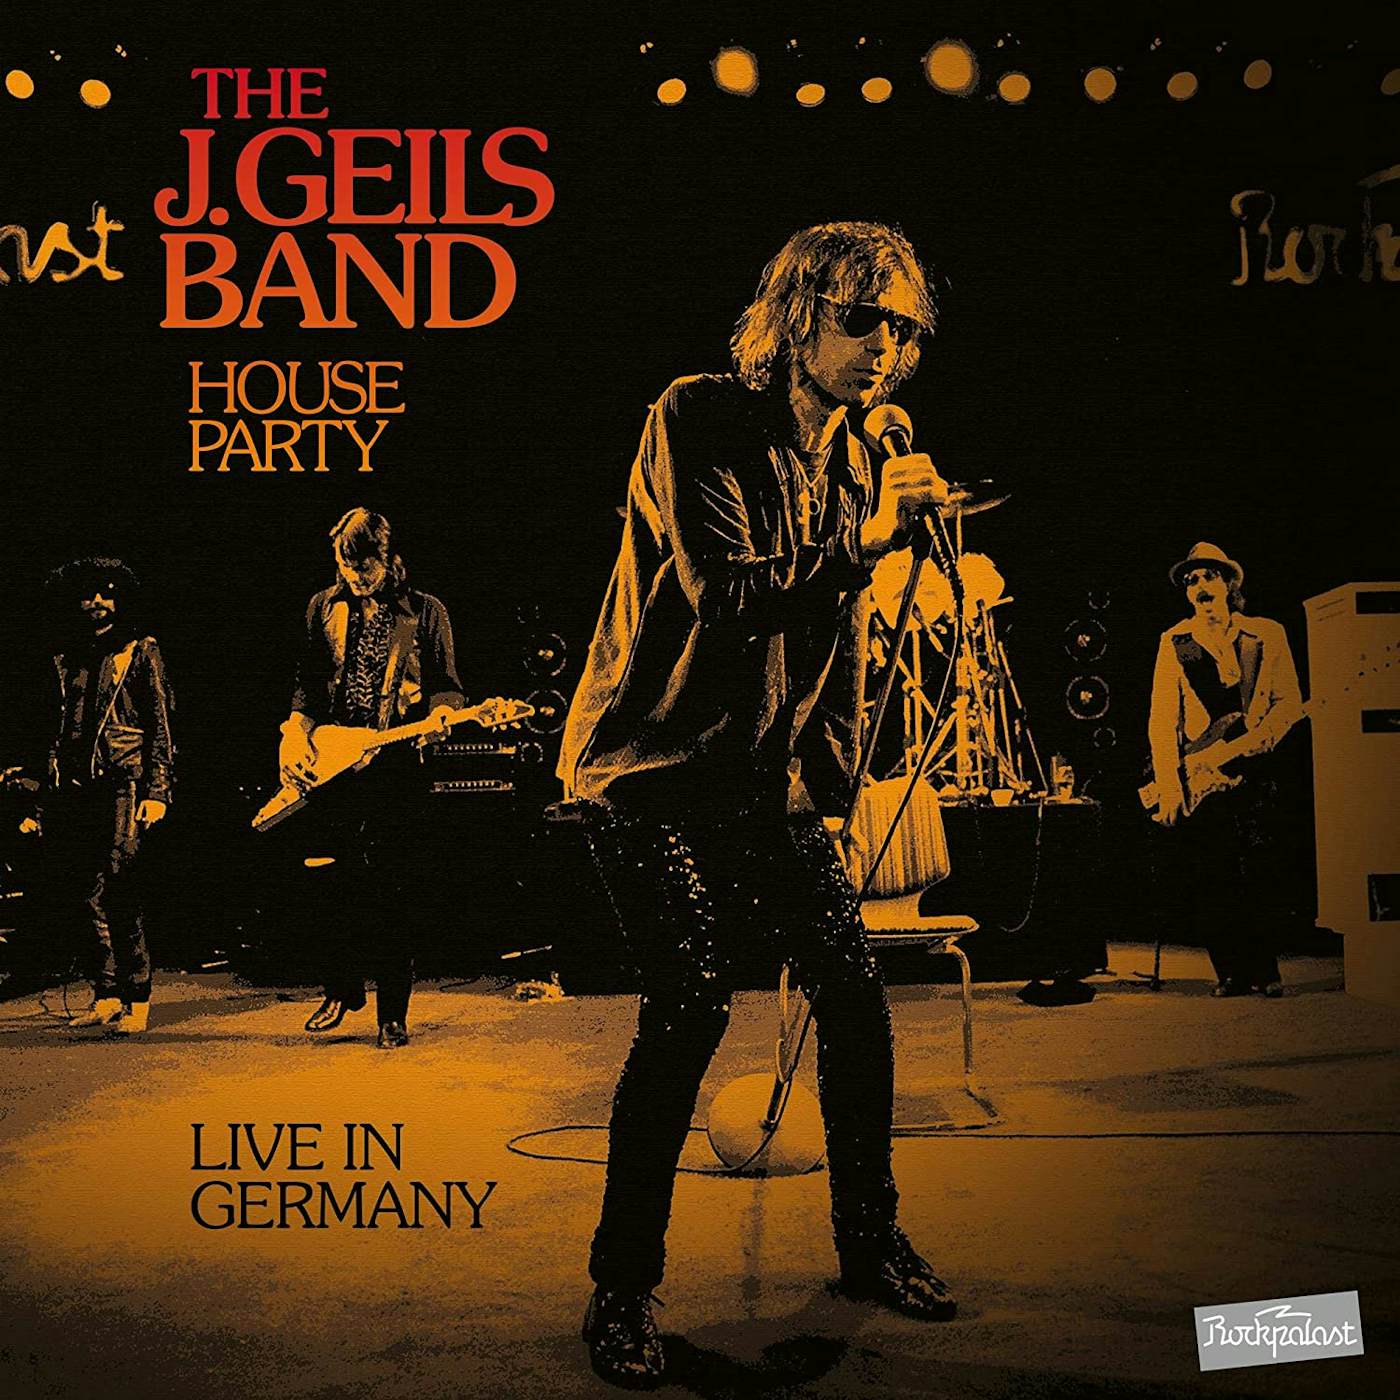 The J. Geils Band House Party Live In Germany (Ltd. Orange Vinyl Record